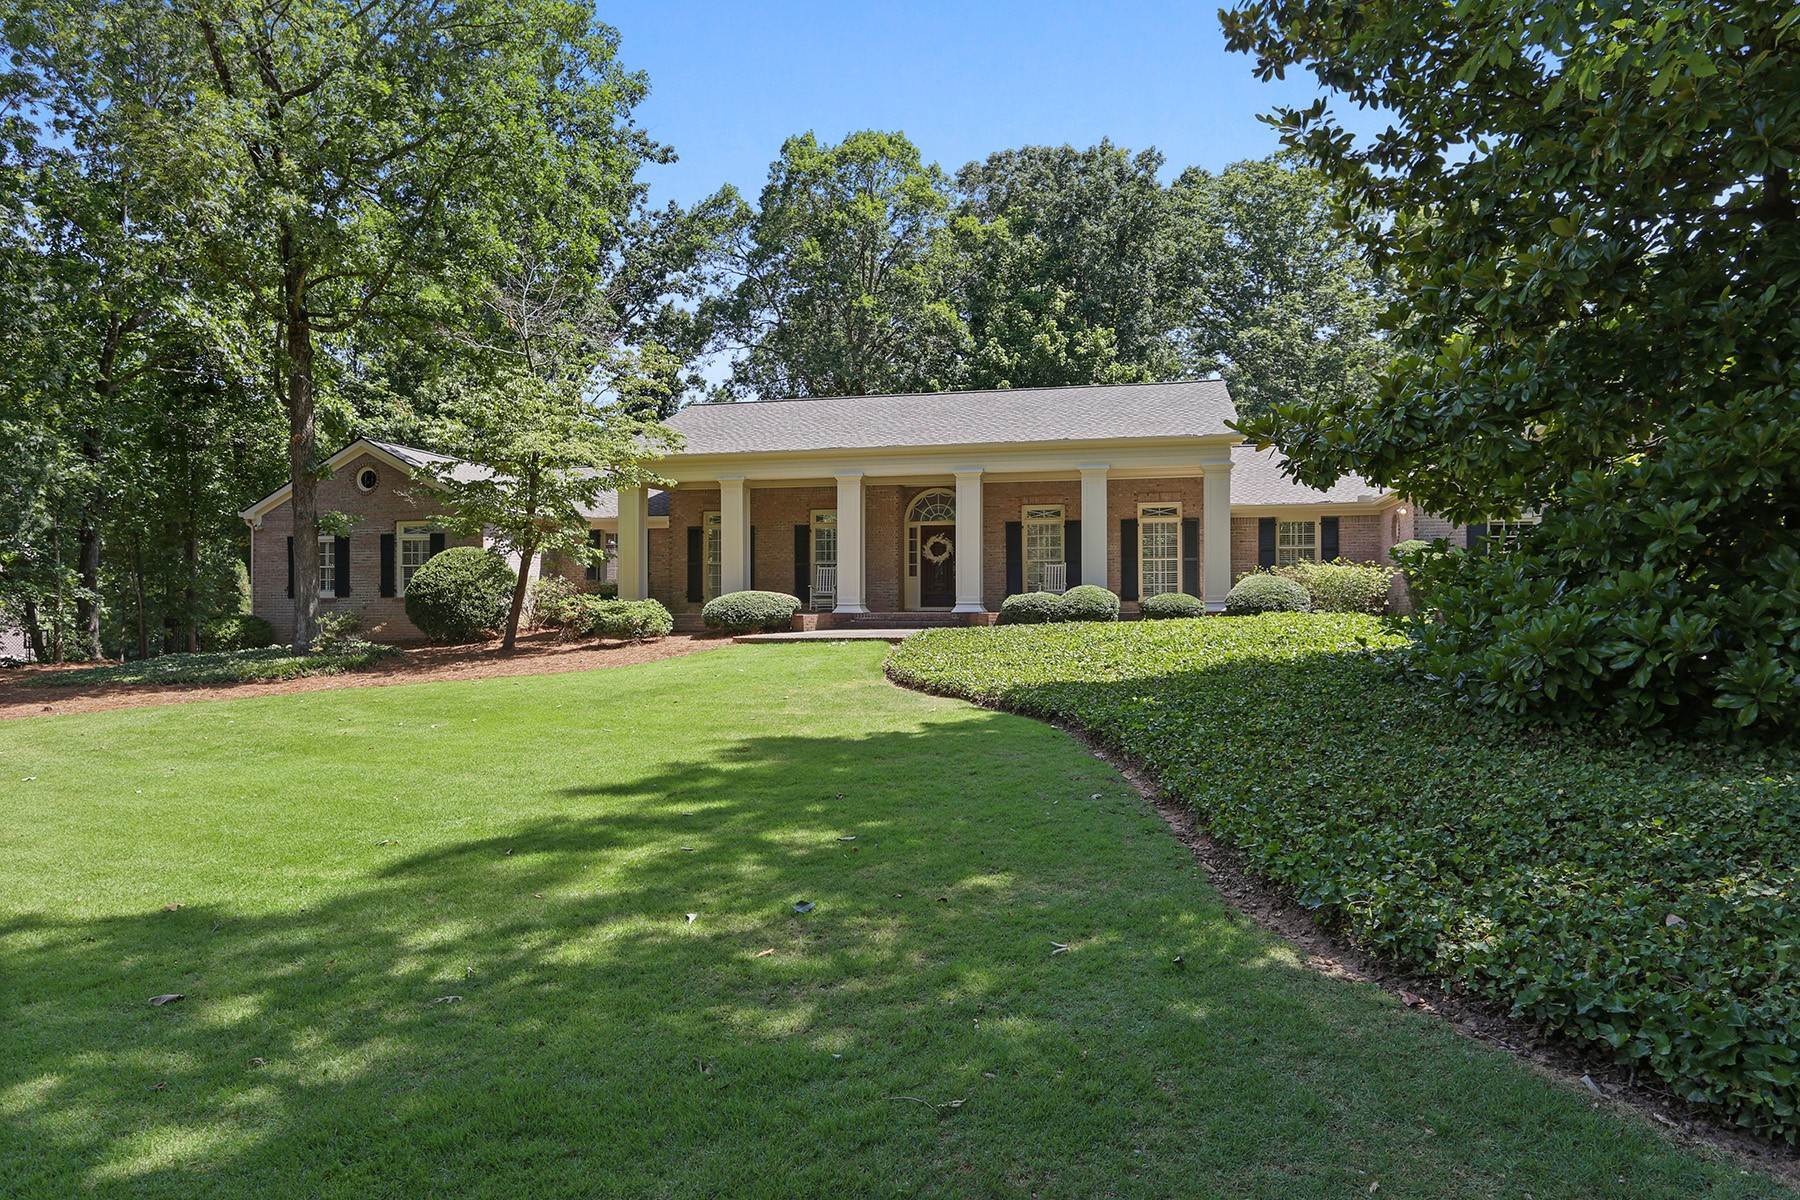 37. Single Family Homes for Sale at Beautiful Home on Private 2.1+/- Acre Lot 405 Heards Ferry Road Sandy Springs, Georgia 30328 United States